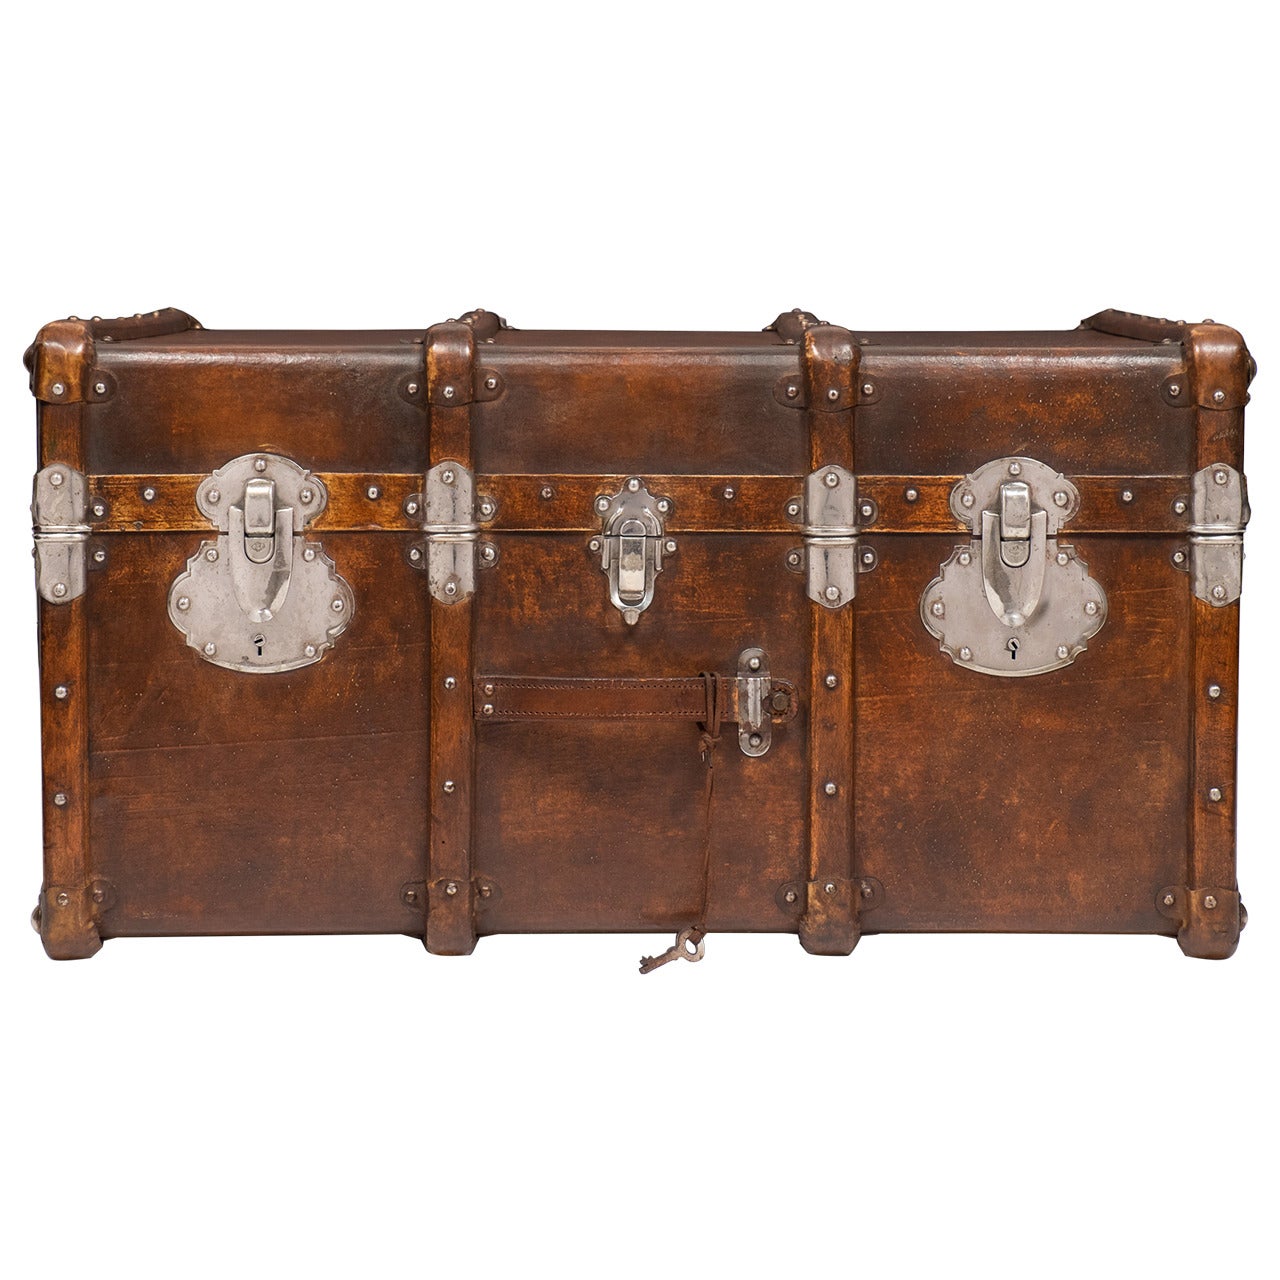 French Vintage Travel Trunk